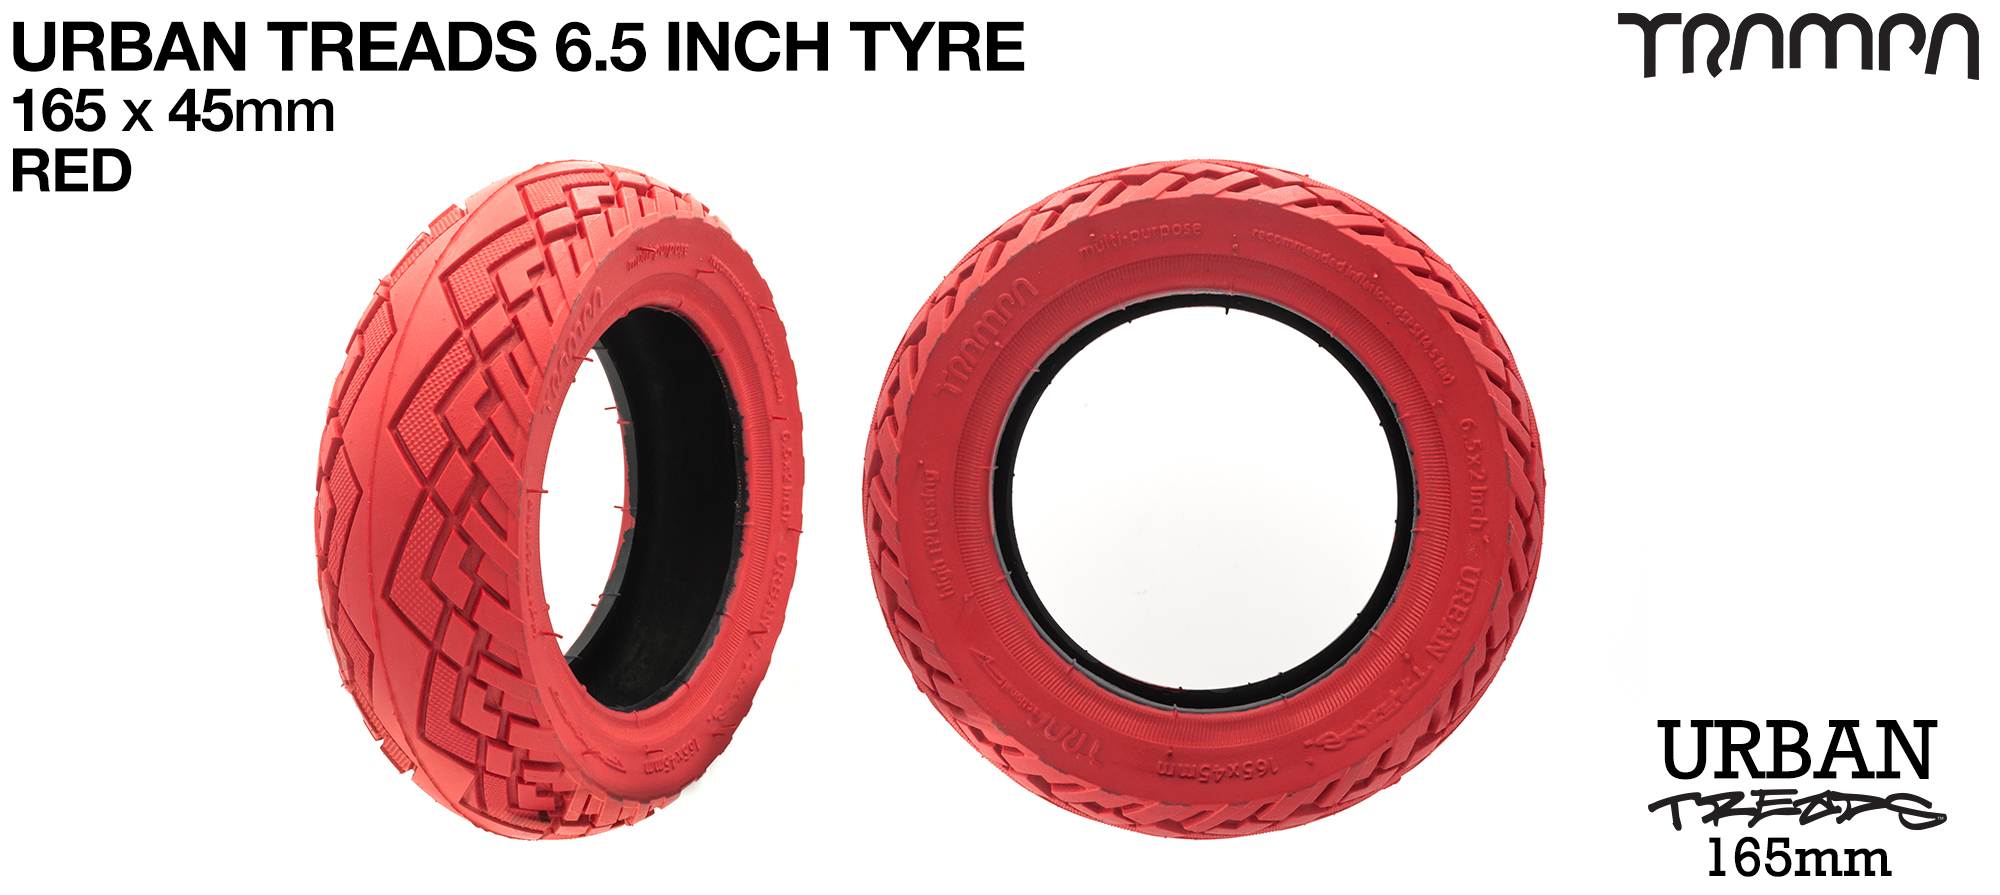 6.5 Inch Tyre TRAMPA URBAN TREADS is the perfect all round tyre for Urban & City riding - RED 